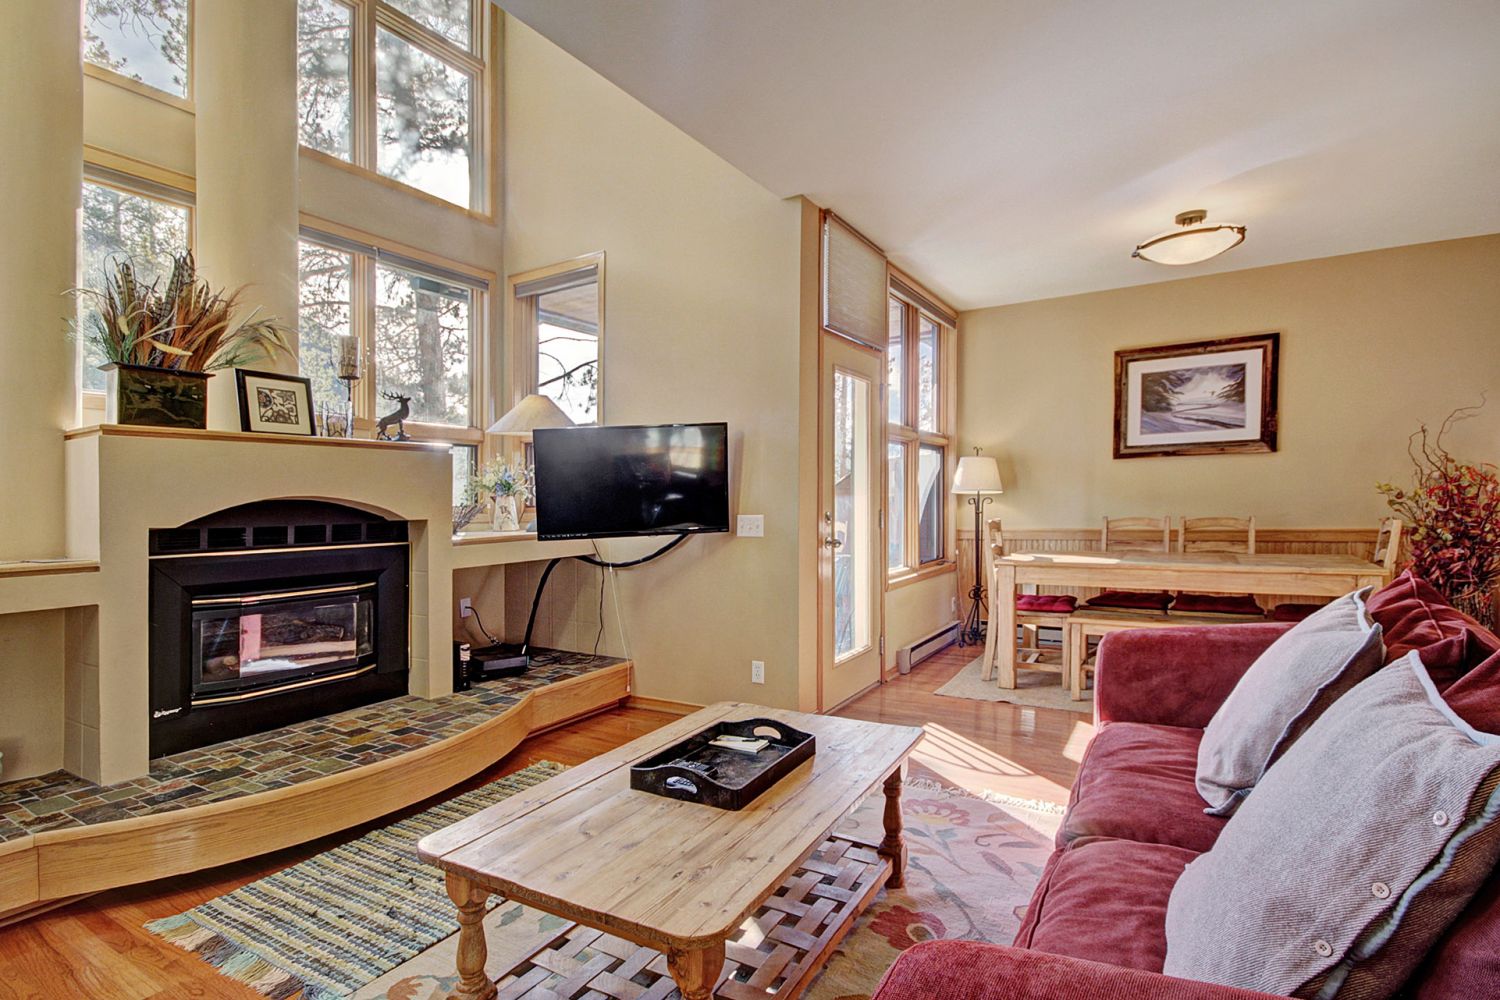 Living Room - Cozy up next to the gas fireplace as you watch a movie on the flat-screen TV. 